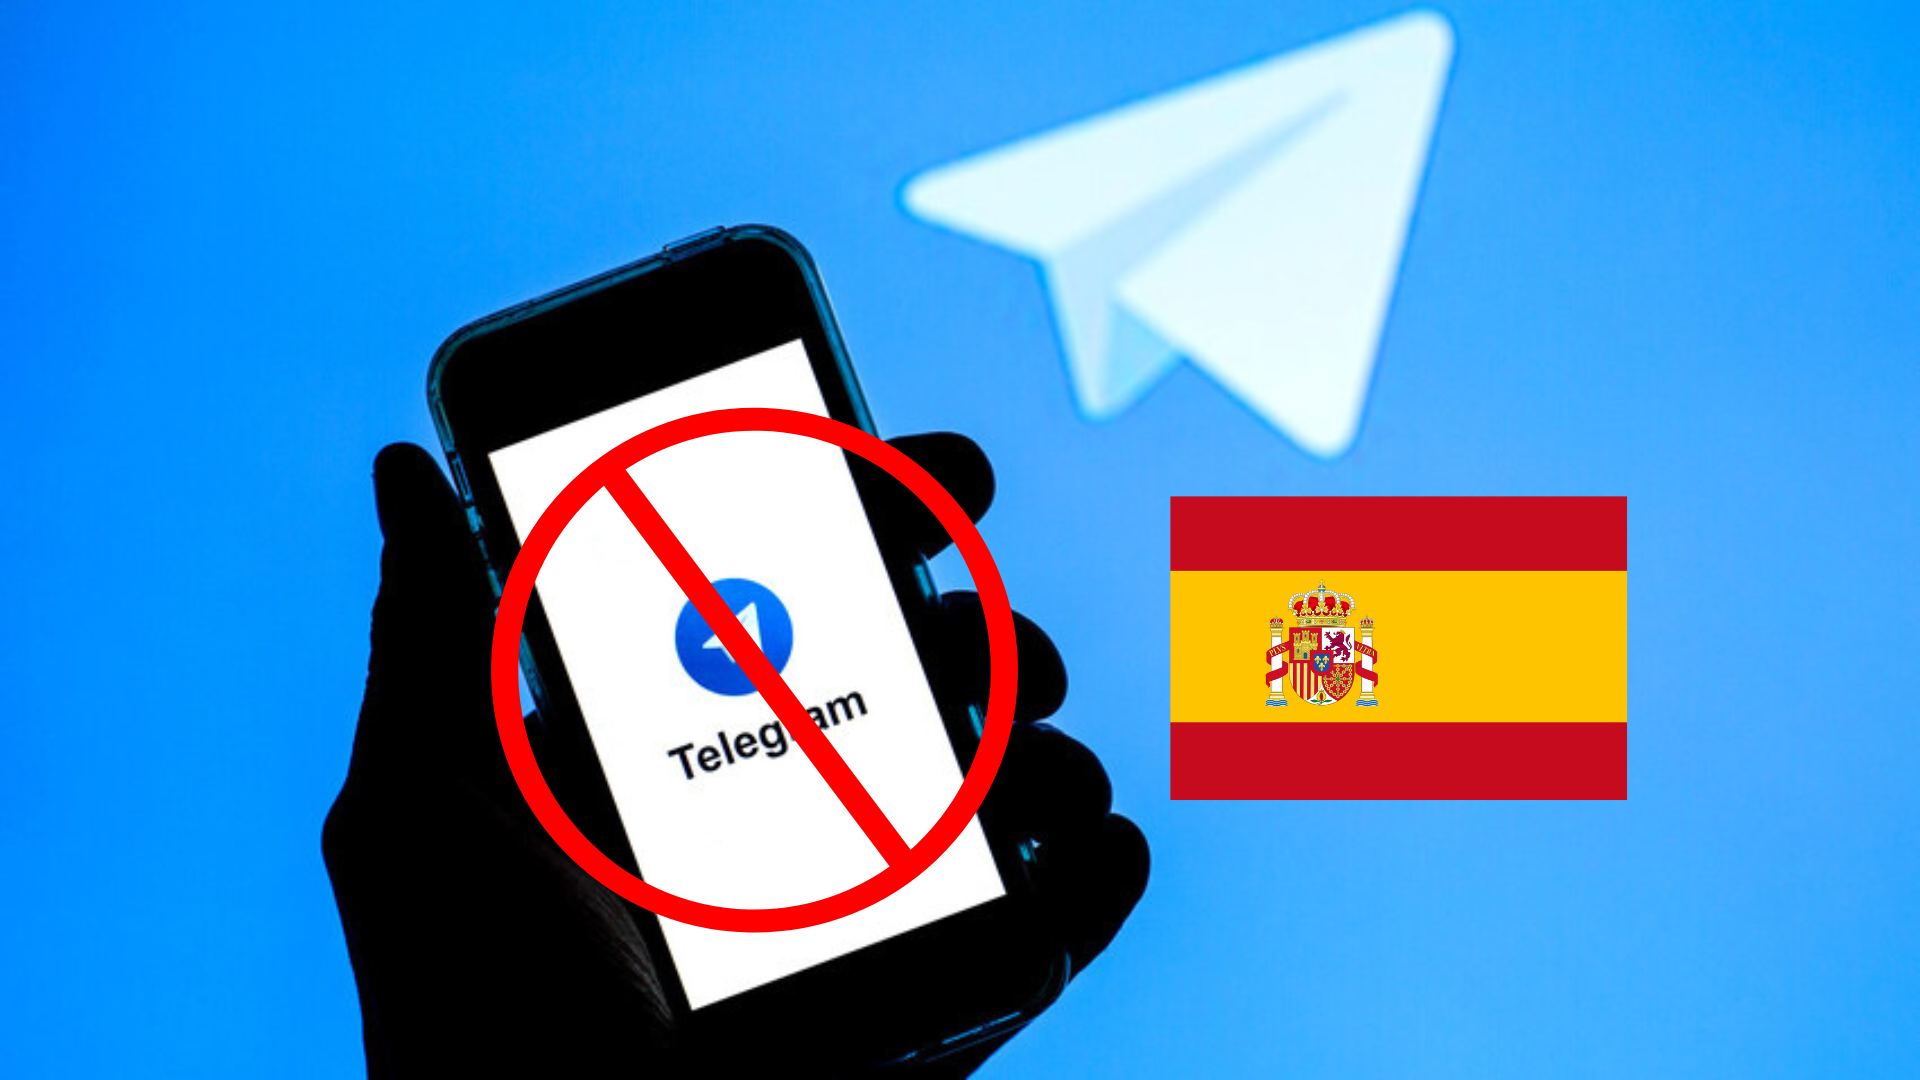 Spain's High Court Orders to Block Telegram for Security Measures